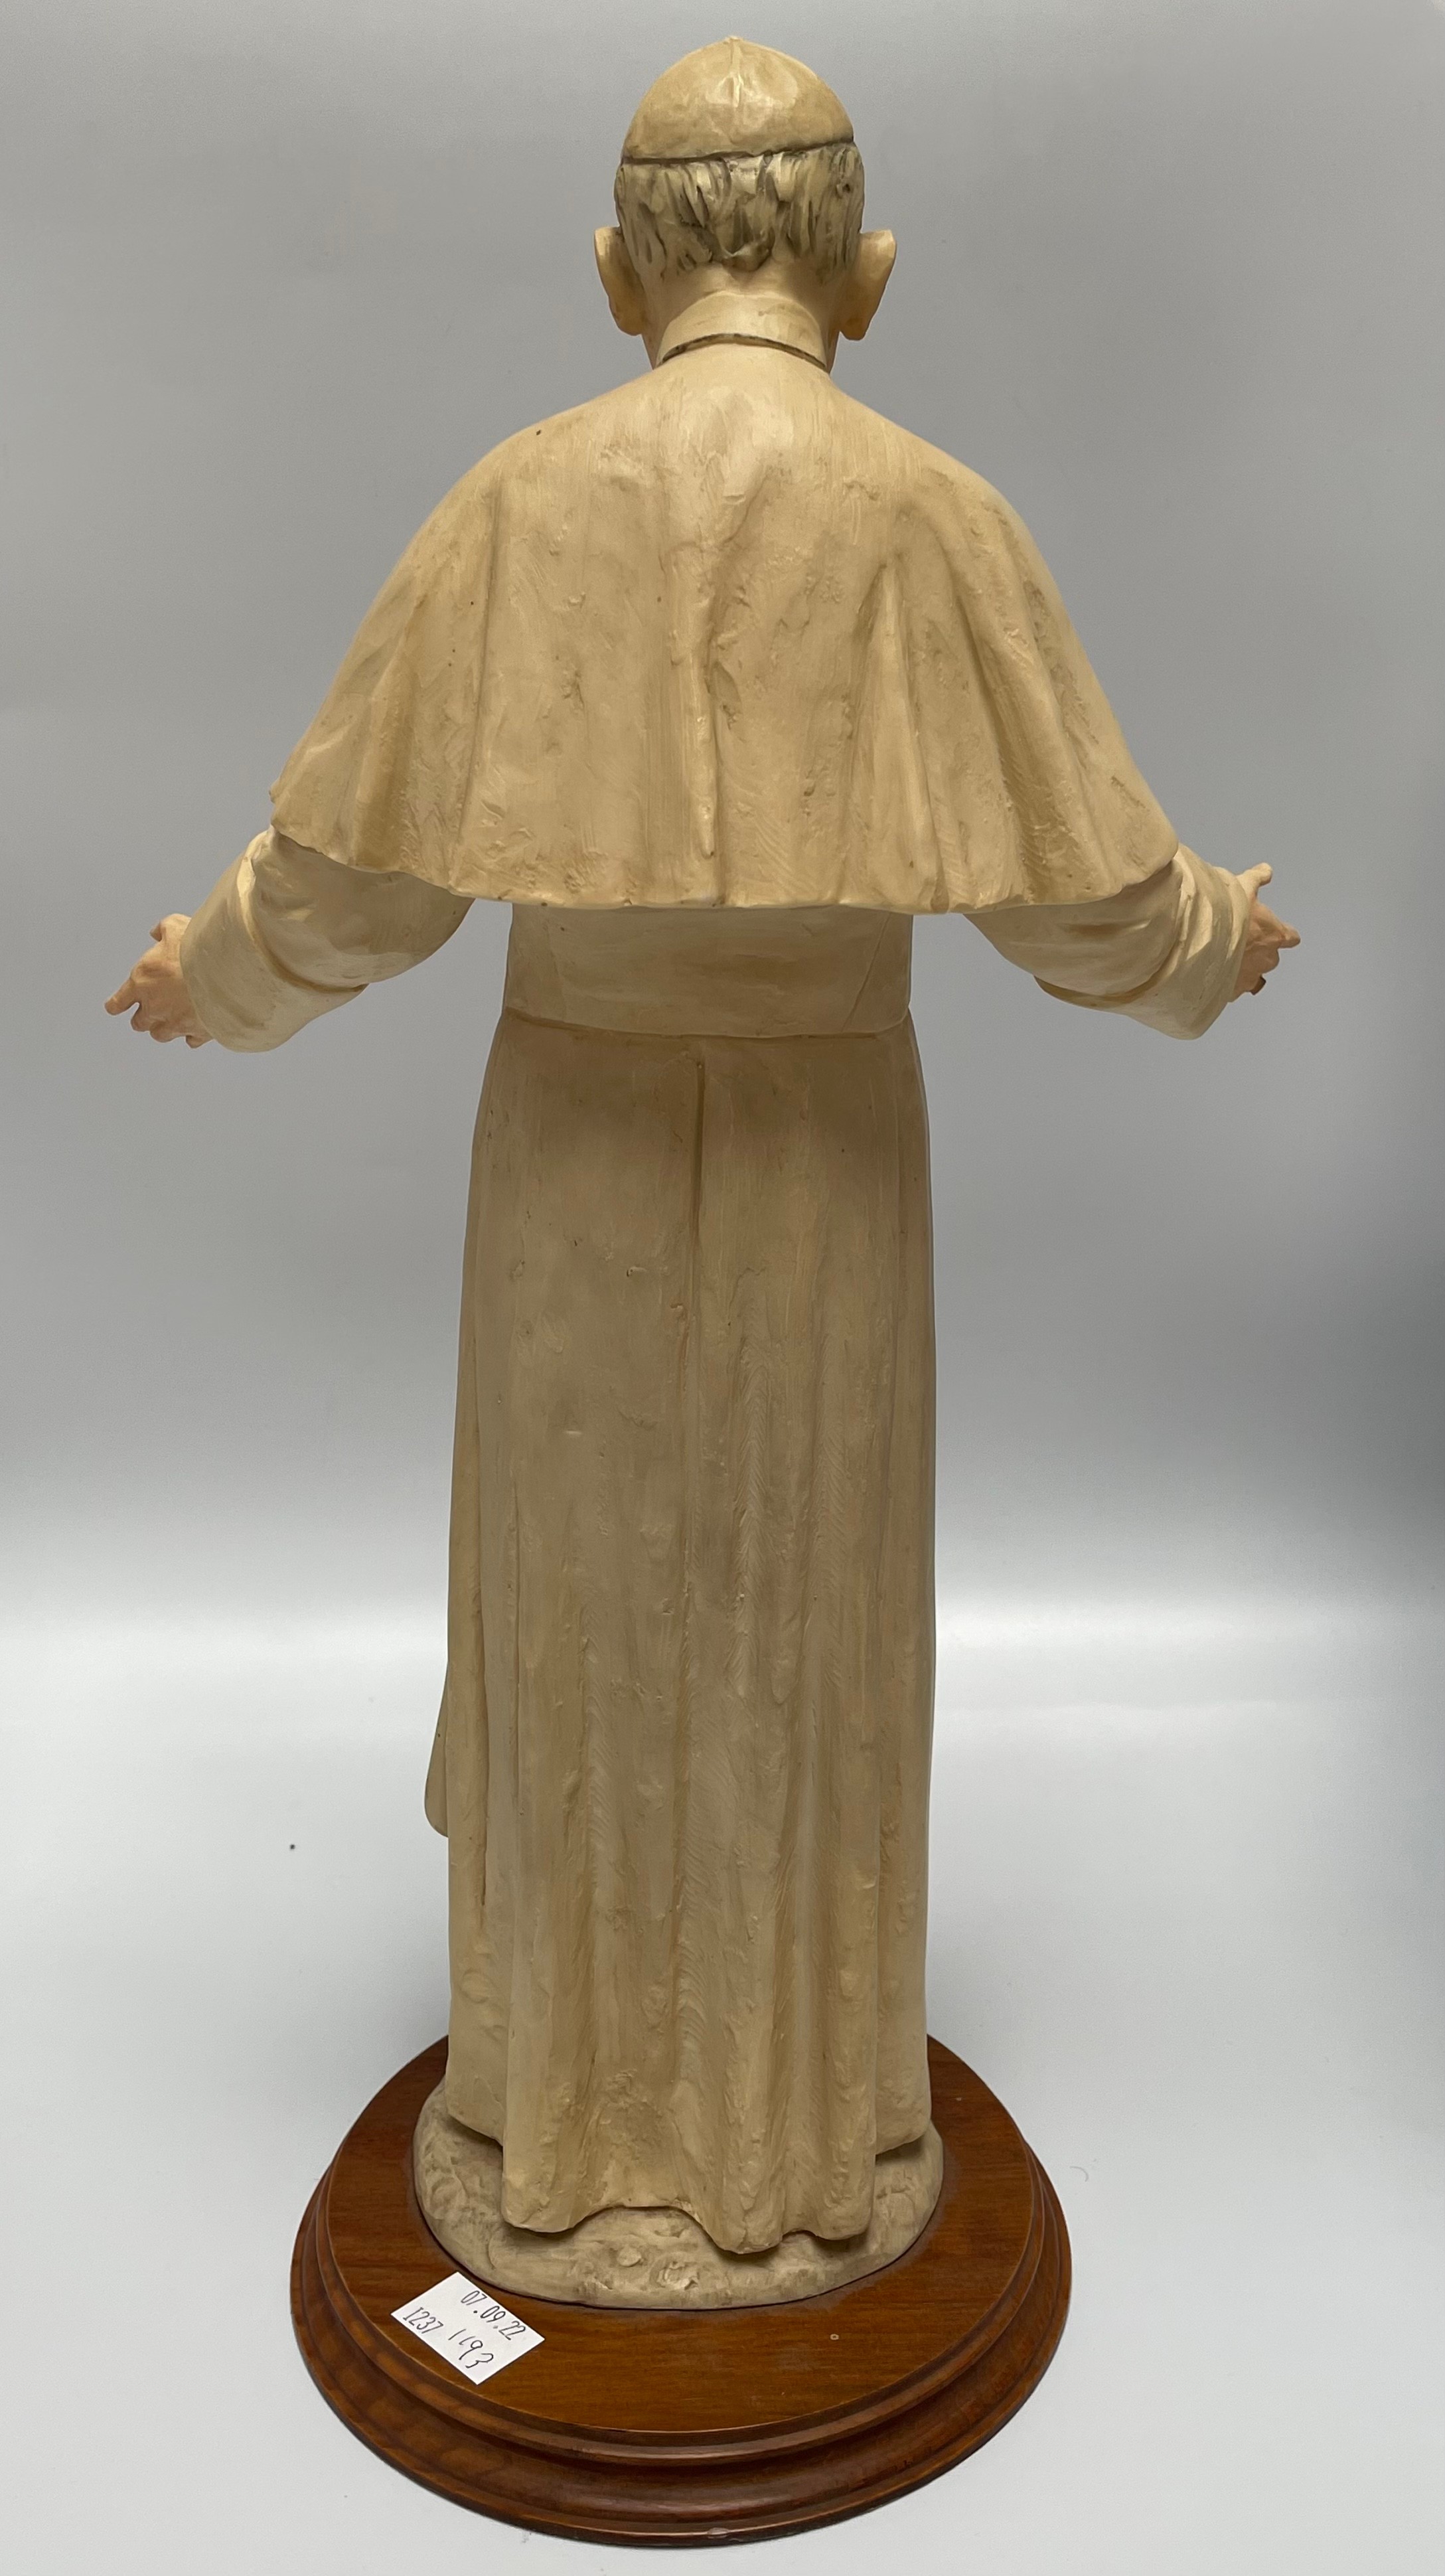 A large composite model of a Pope, possibly John Paul II, in long robes with crucifix necklace and - Image 2 of 3